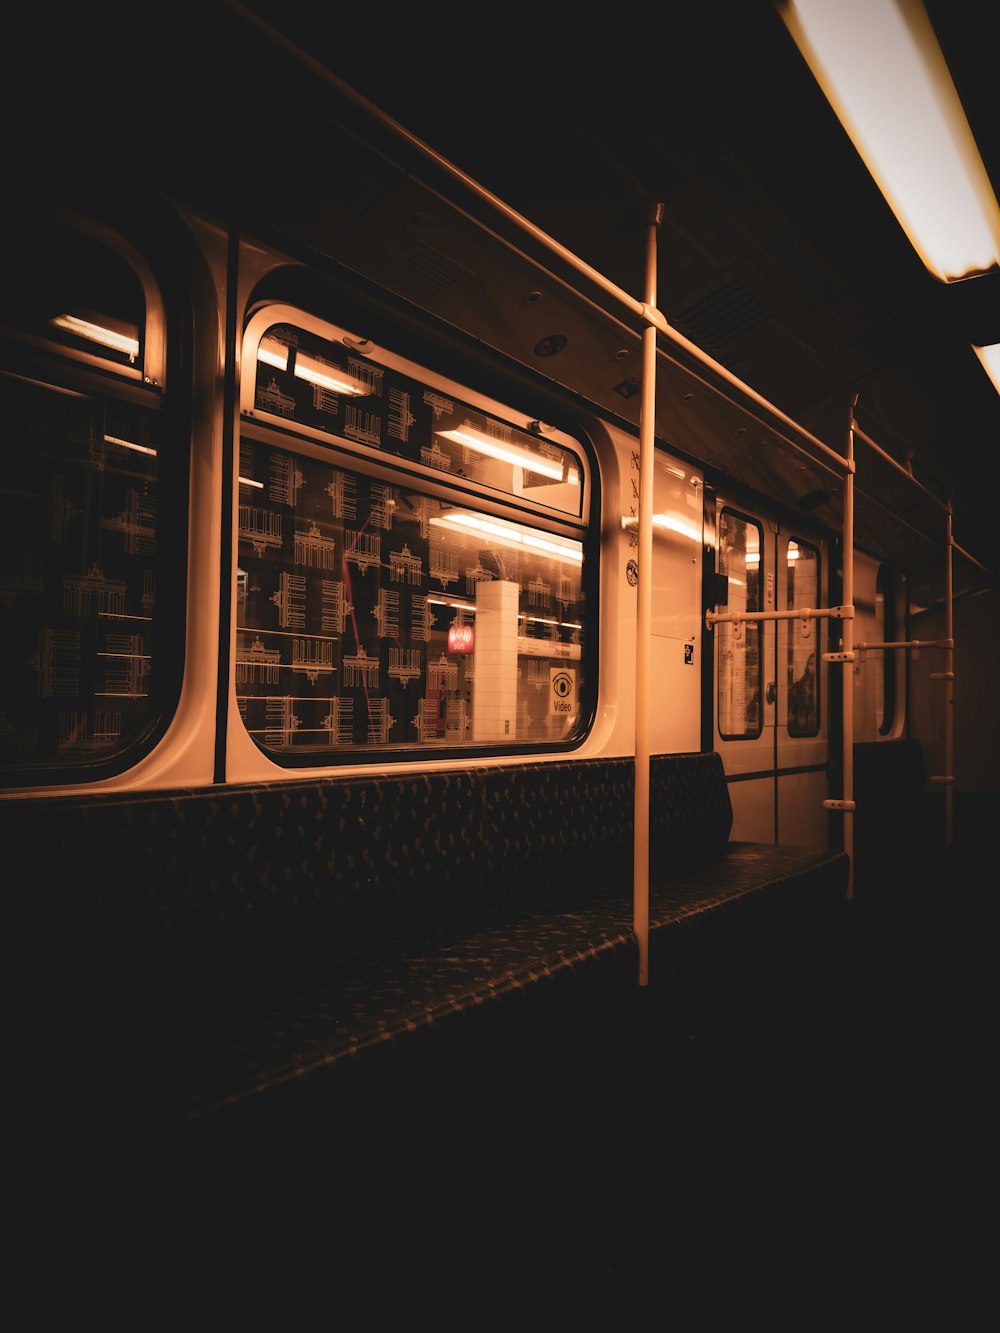 a subway car with the doors open at night